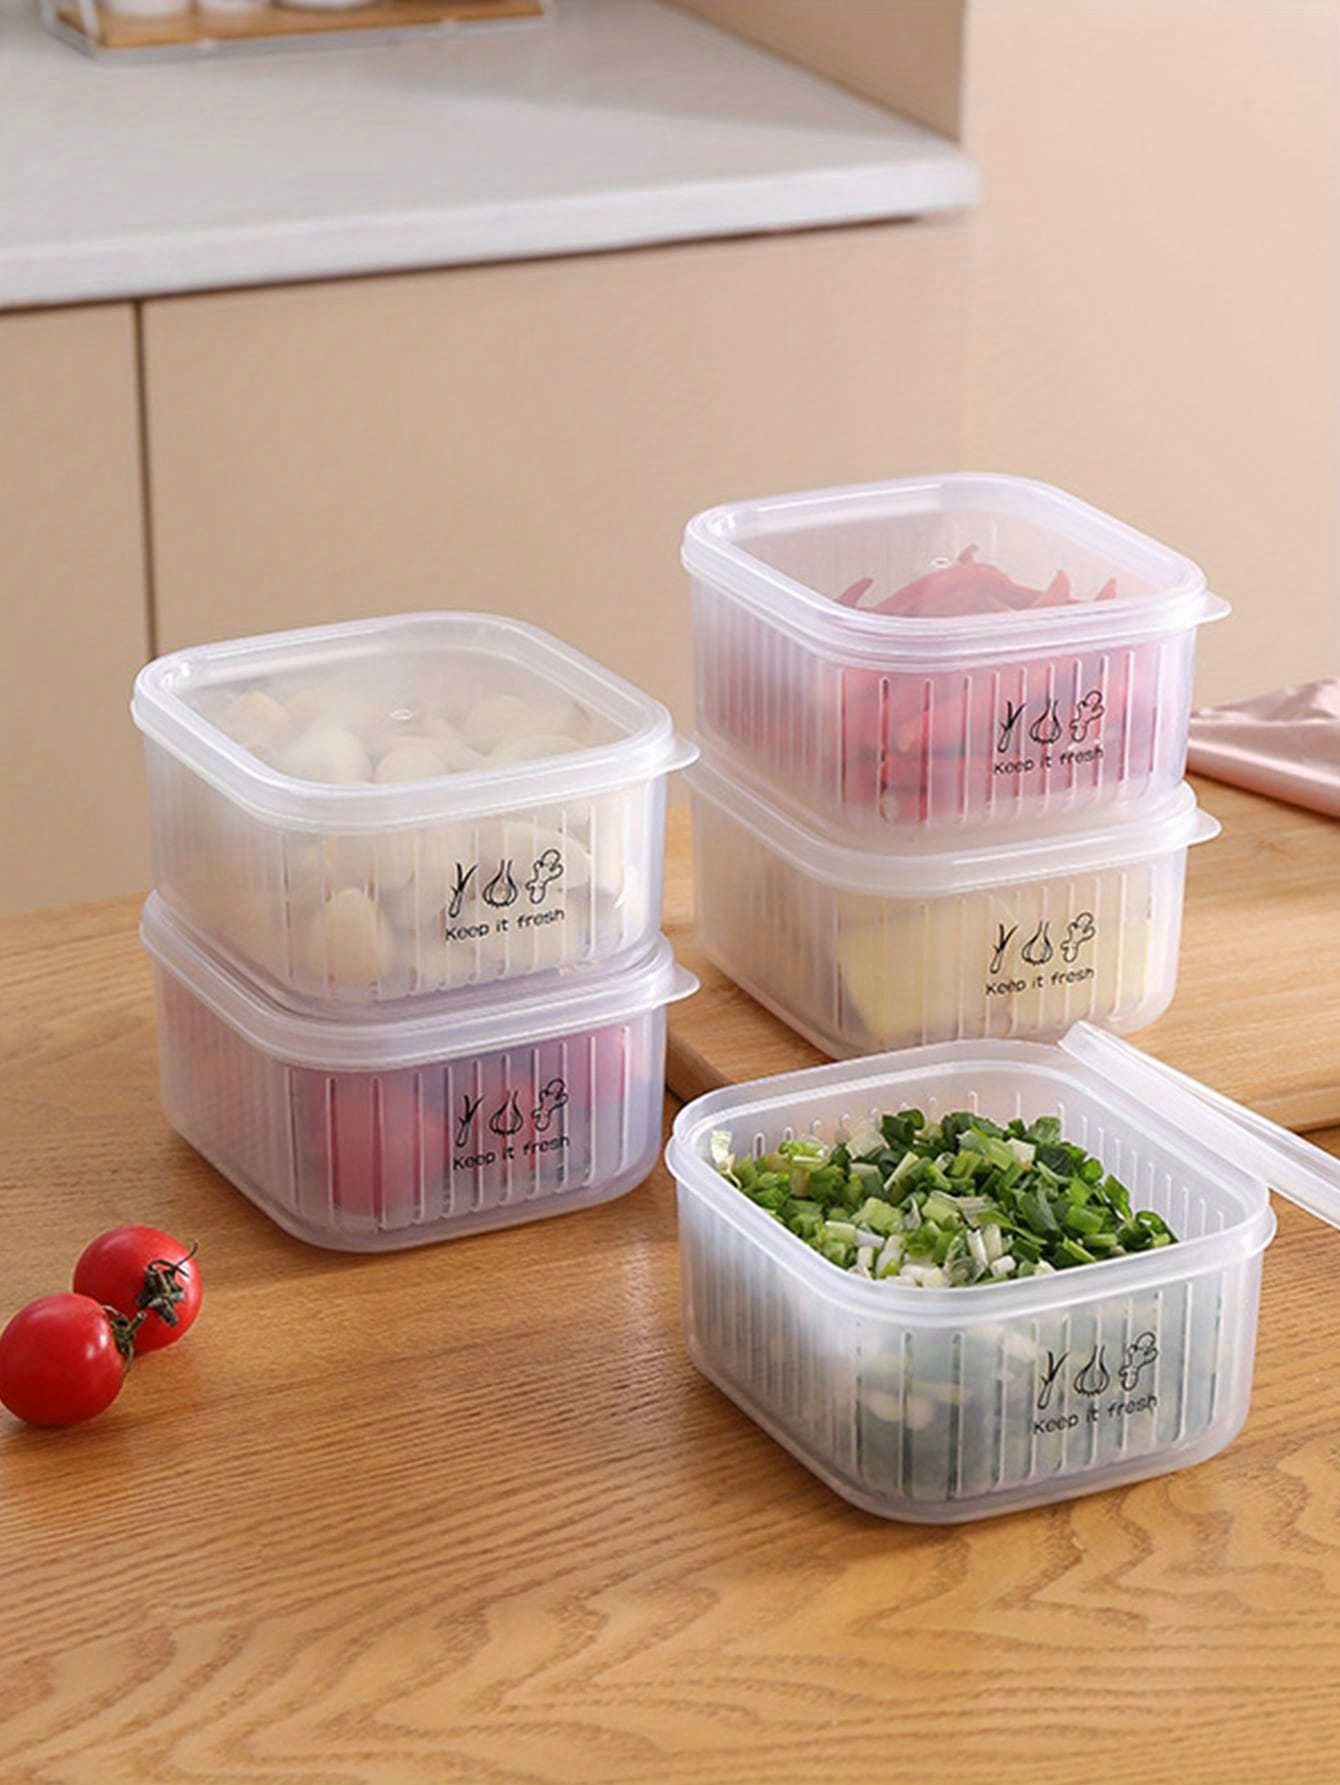 Fridge Storage Box Refrigerator Fresh Vegetable Fruit Boxes Drain Basket Storage  Containers With Lid Kitchen Tools